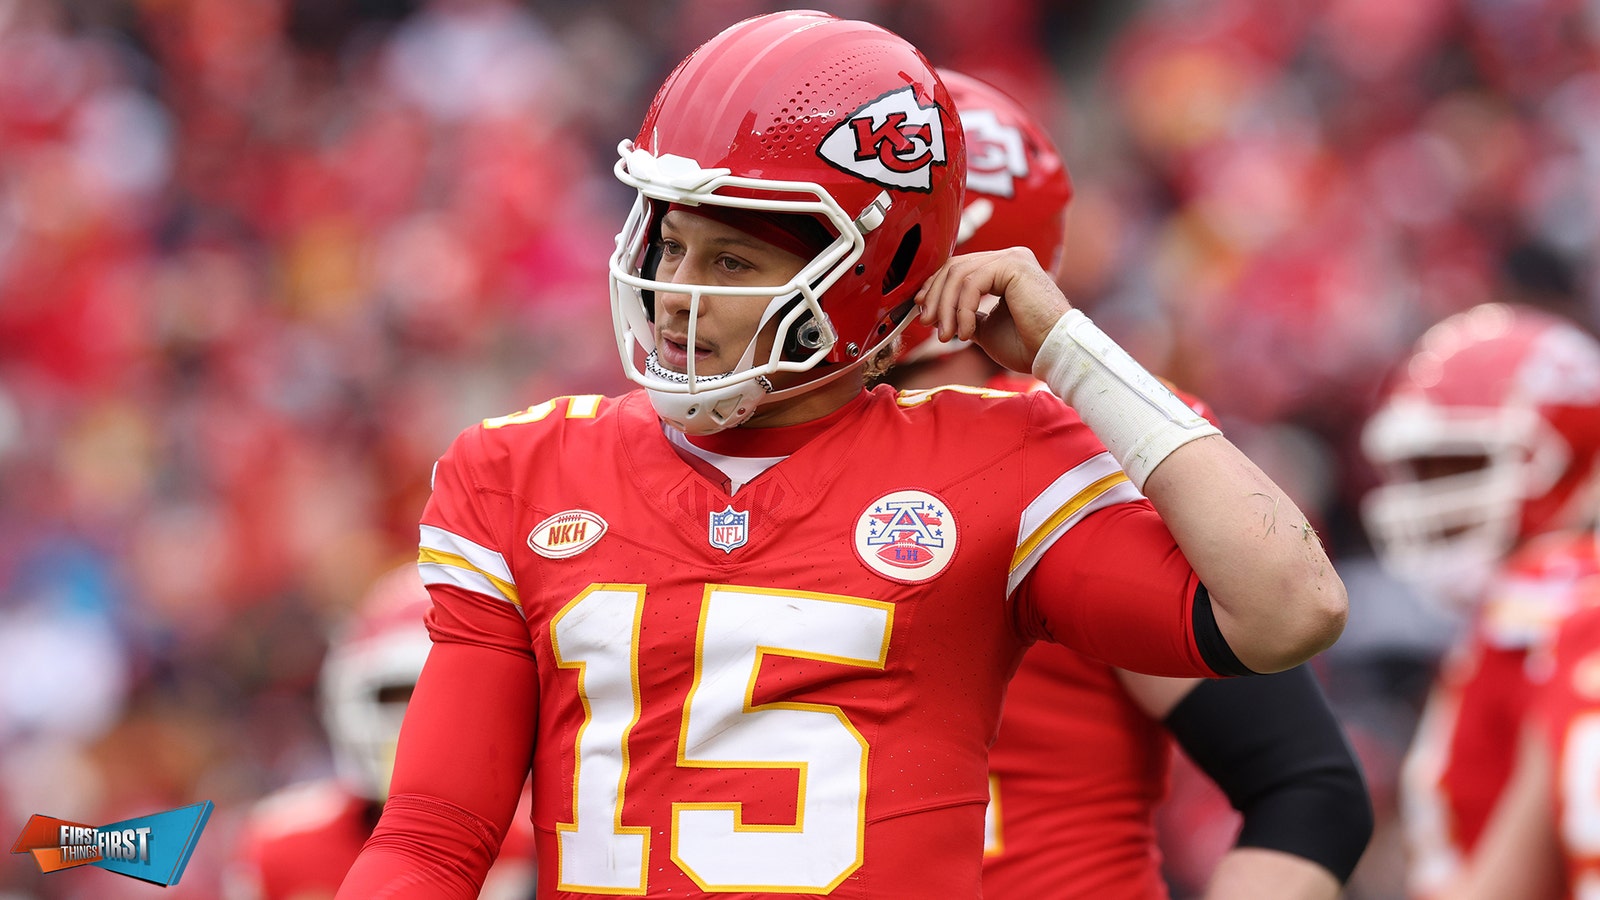 Chiefs fall to rival Raiders on Christmas Day; Patrick Mahomes remains optimistic